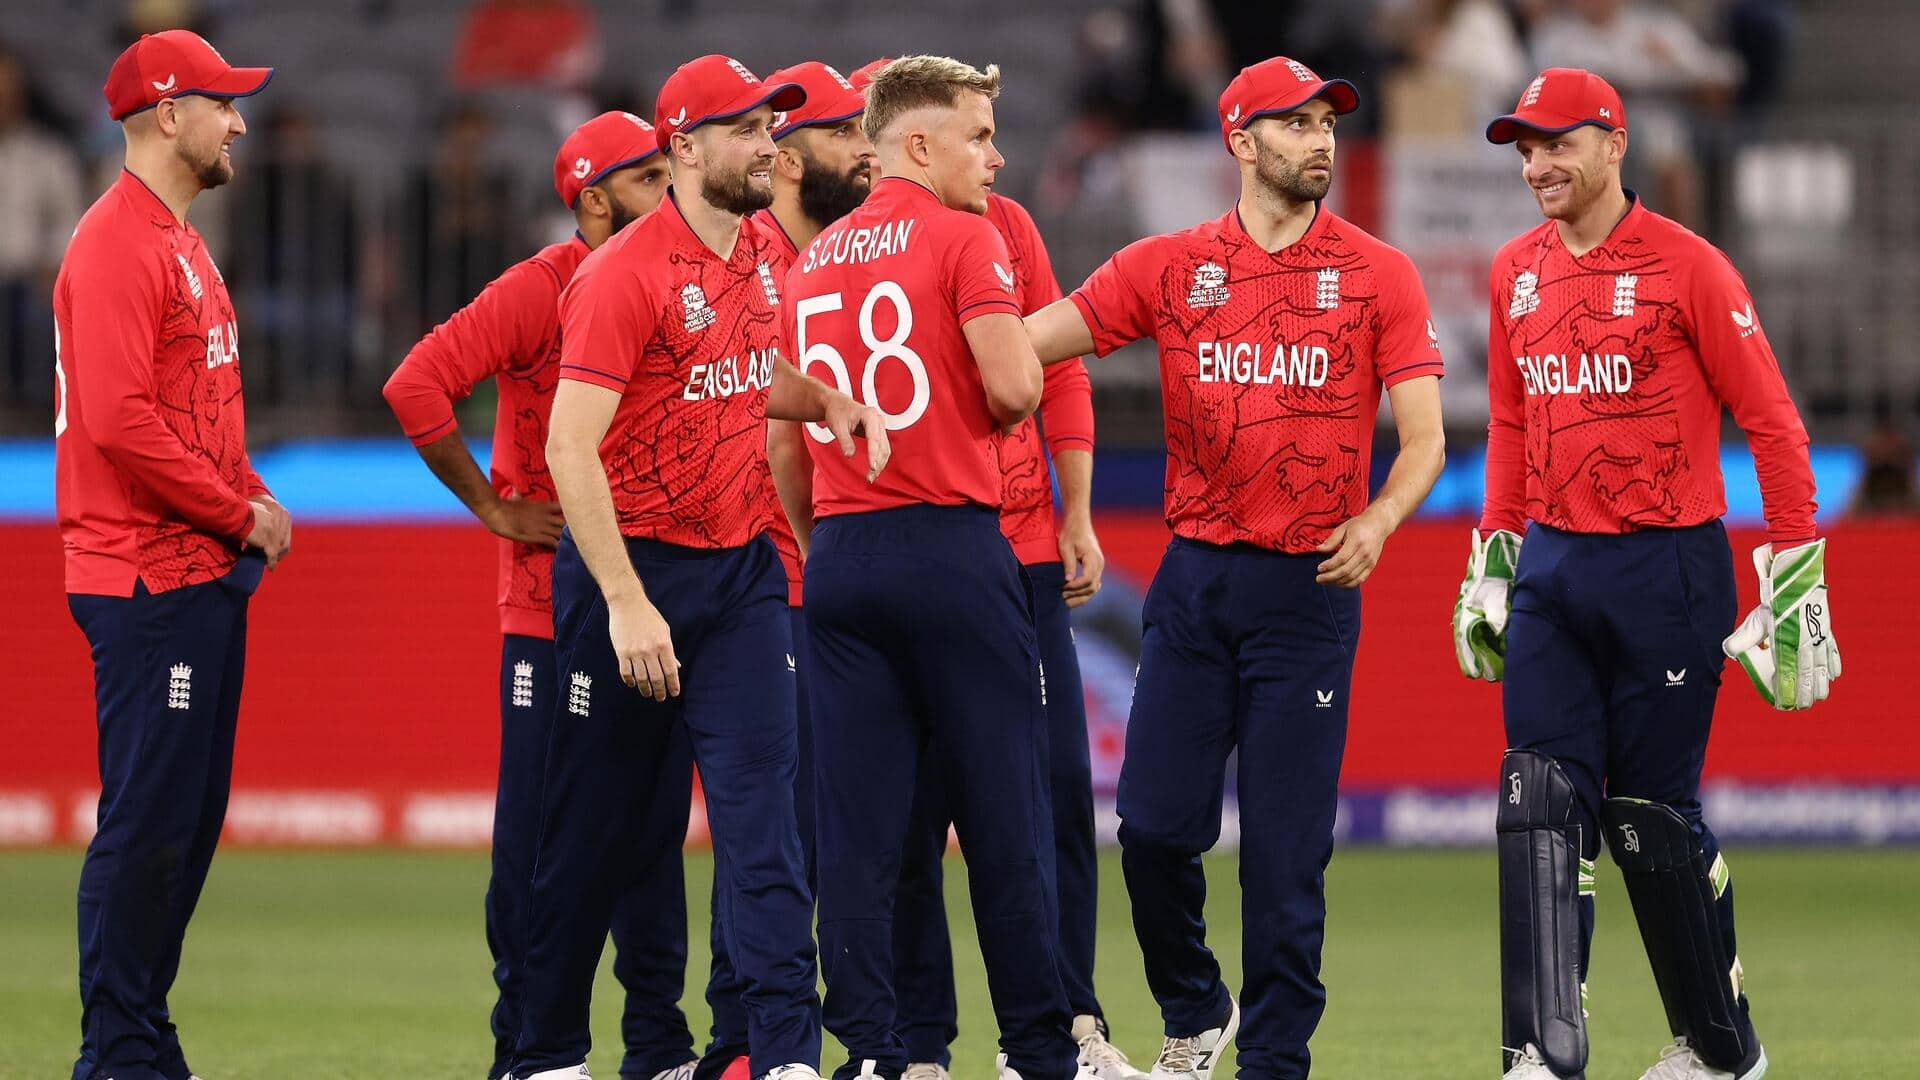 England pacer Sam Curran completes 50 T20I wickets: Key stats